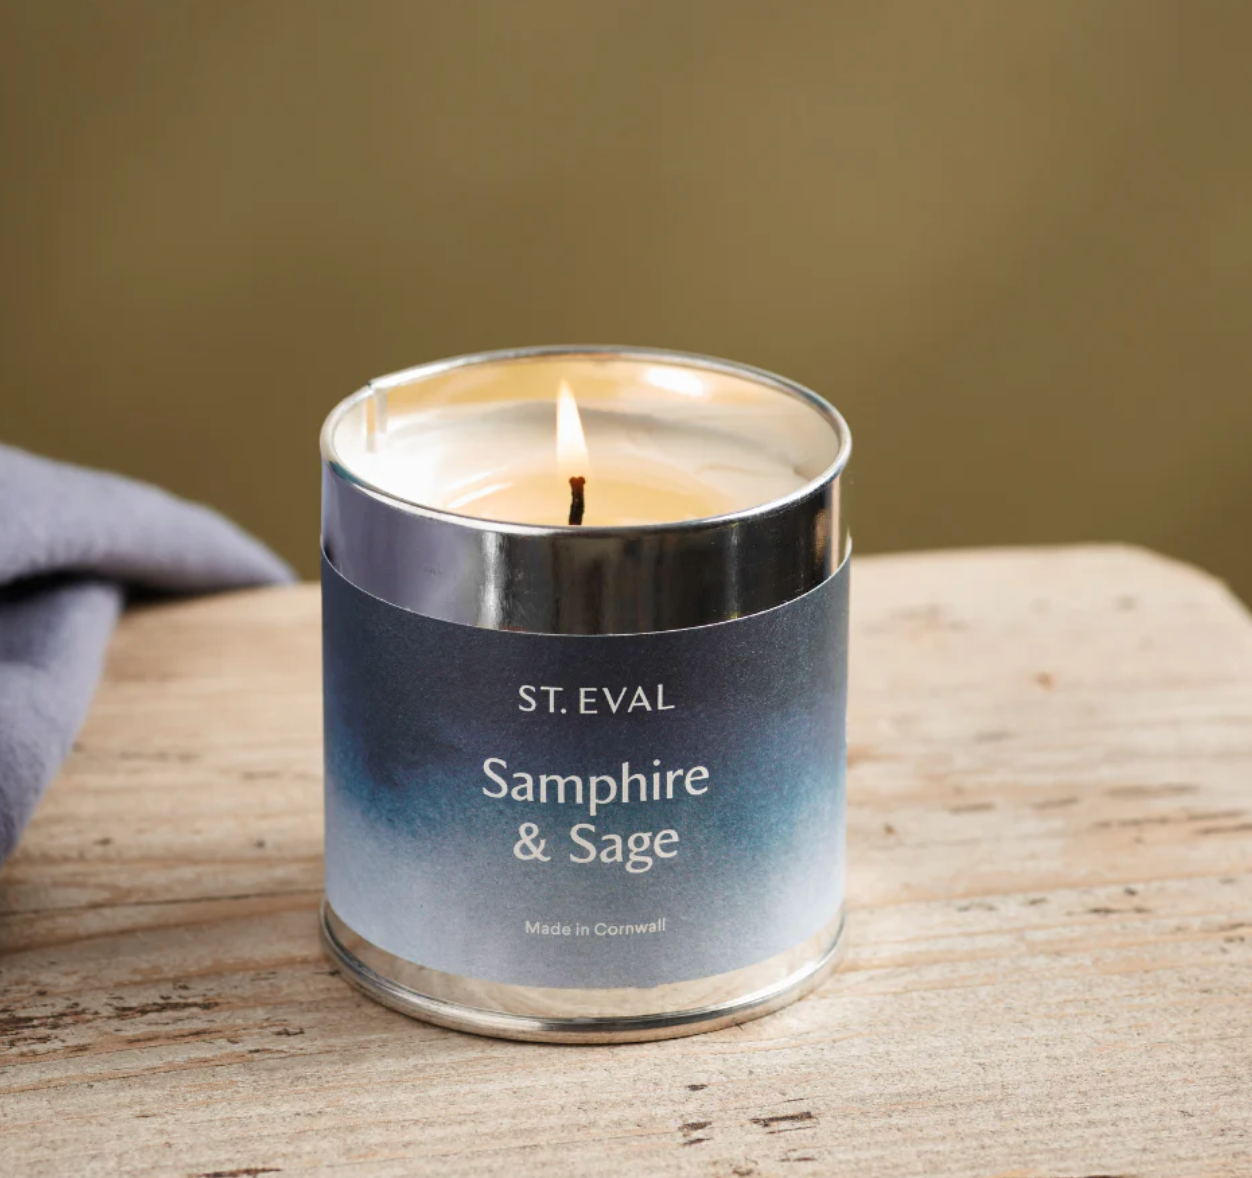 St Eval Samphire & Sage Scented Tin Candle